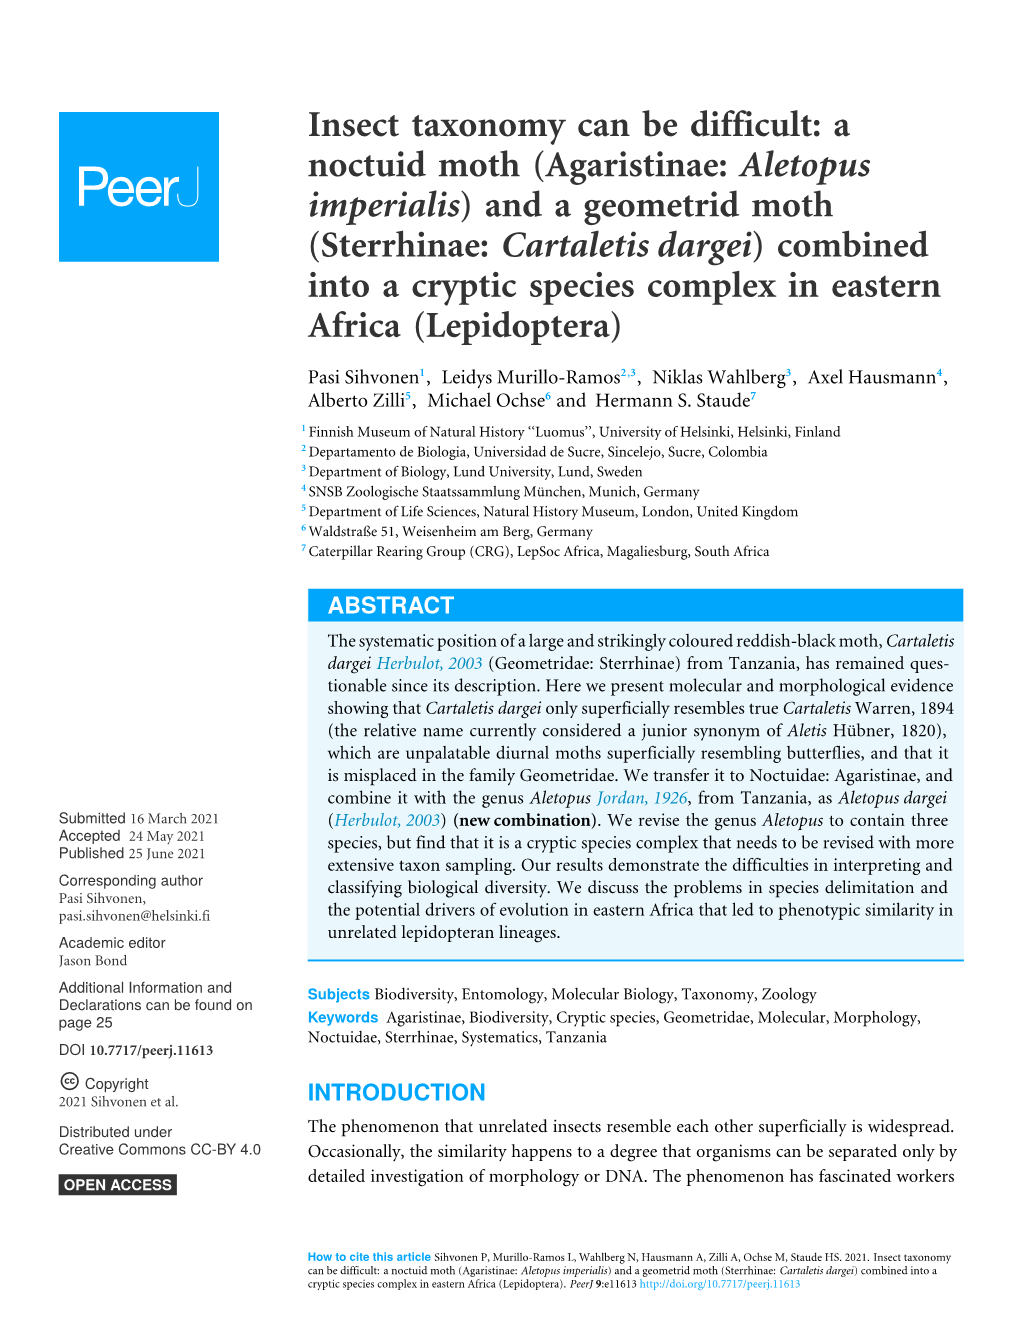 Agaristinae: Aletopus Imperialis) and a Geometrid Moth (Sterrhinae: Cartaletis Dargei) Combined Into a Cryptic Species Complex in Eastern Africa (Lepidoptera